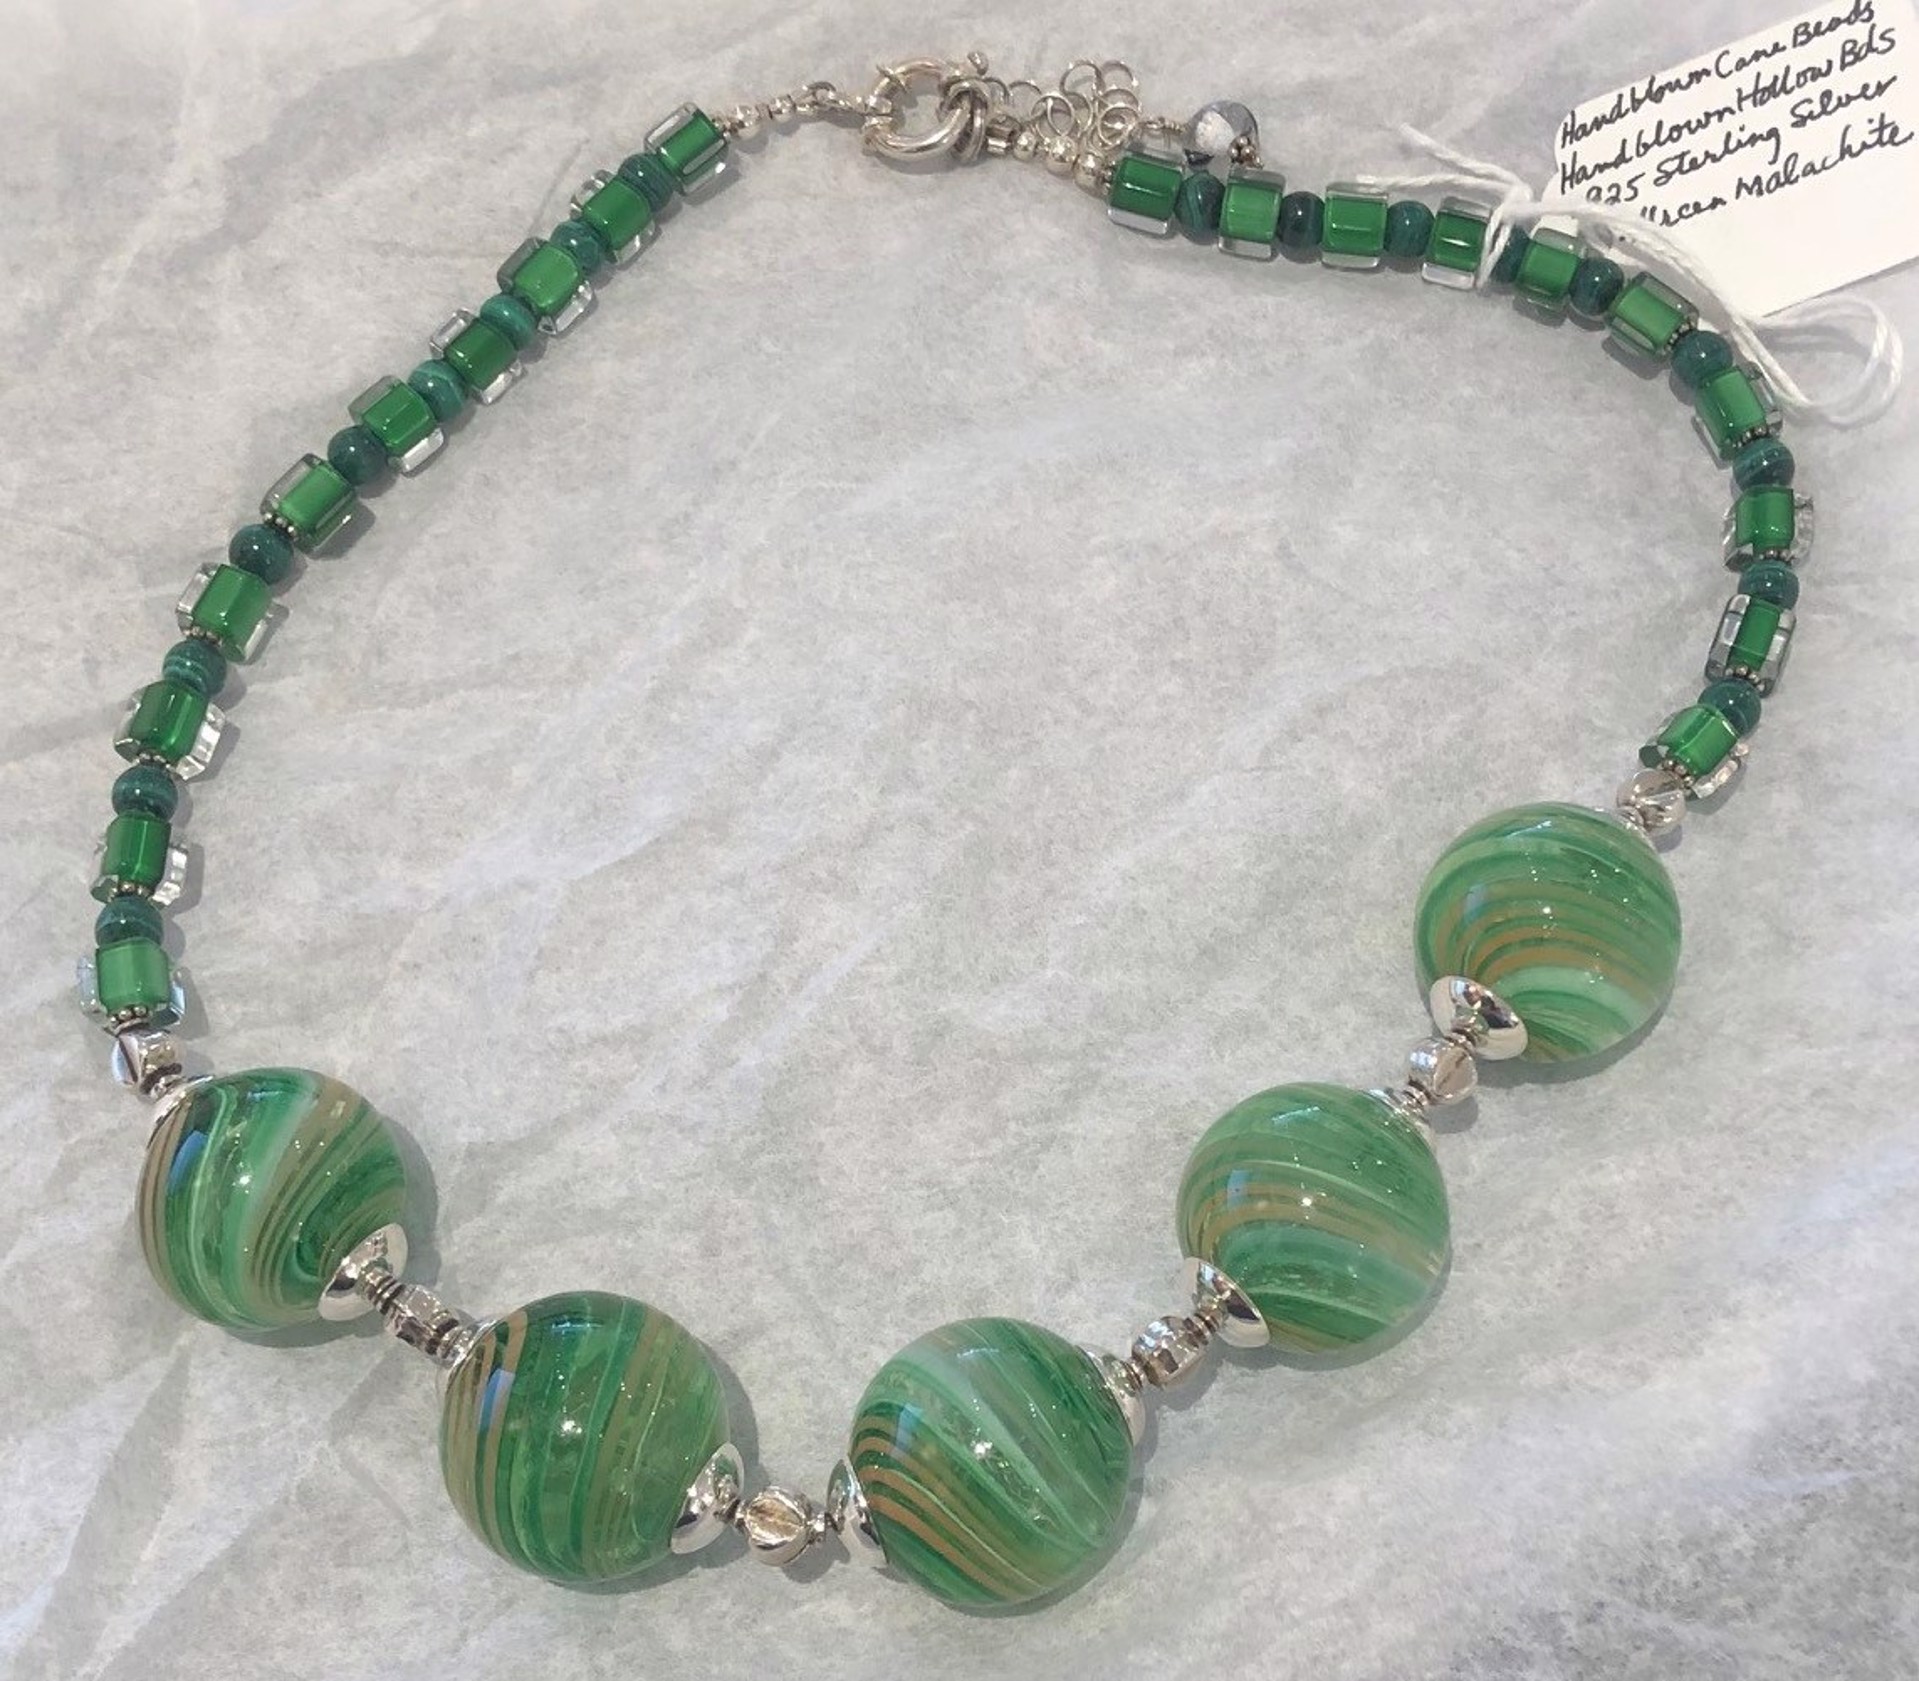 Necklace Blown Bead - 203081 by Virginia Wilson Toccalino